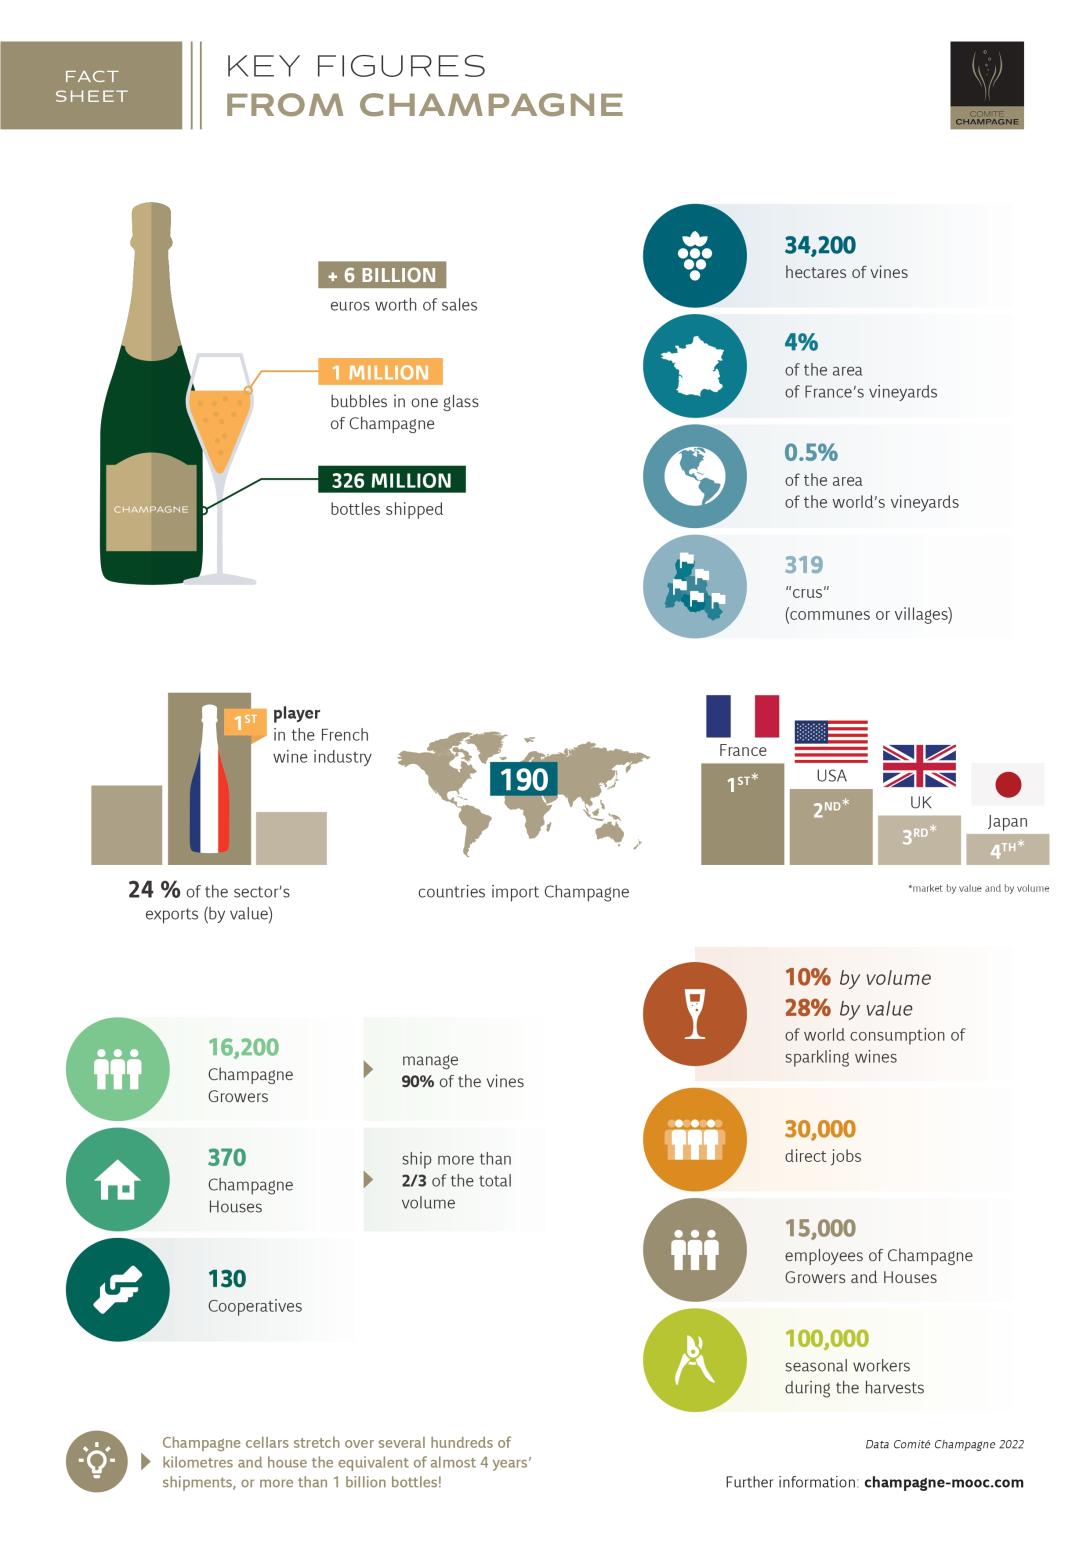 Key figures for Champagne